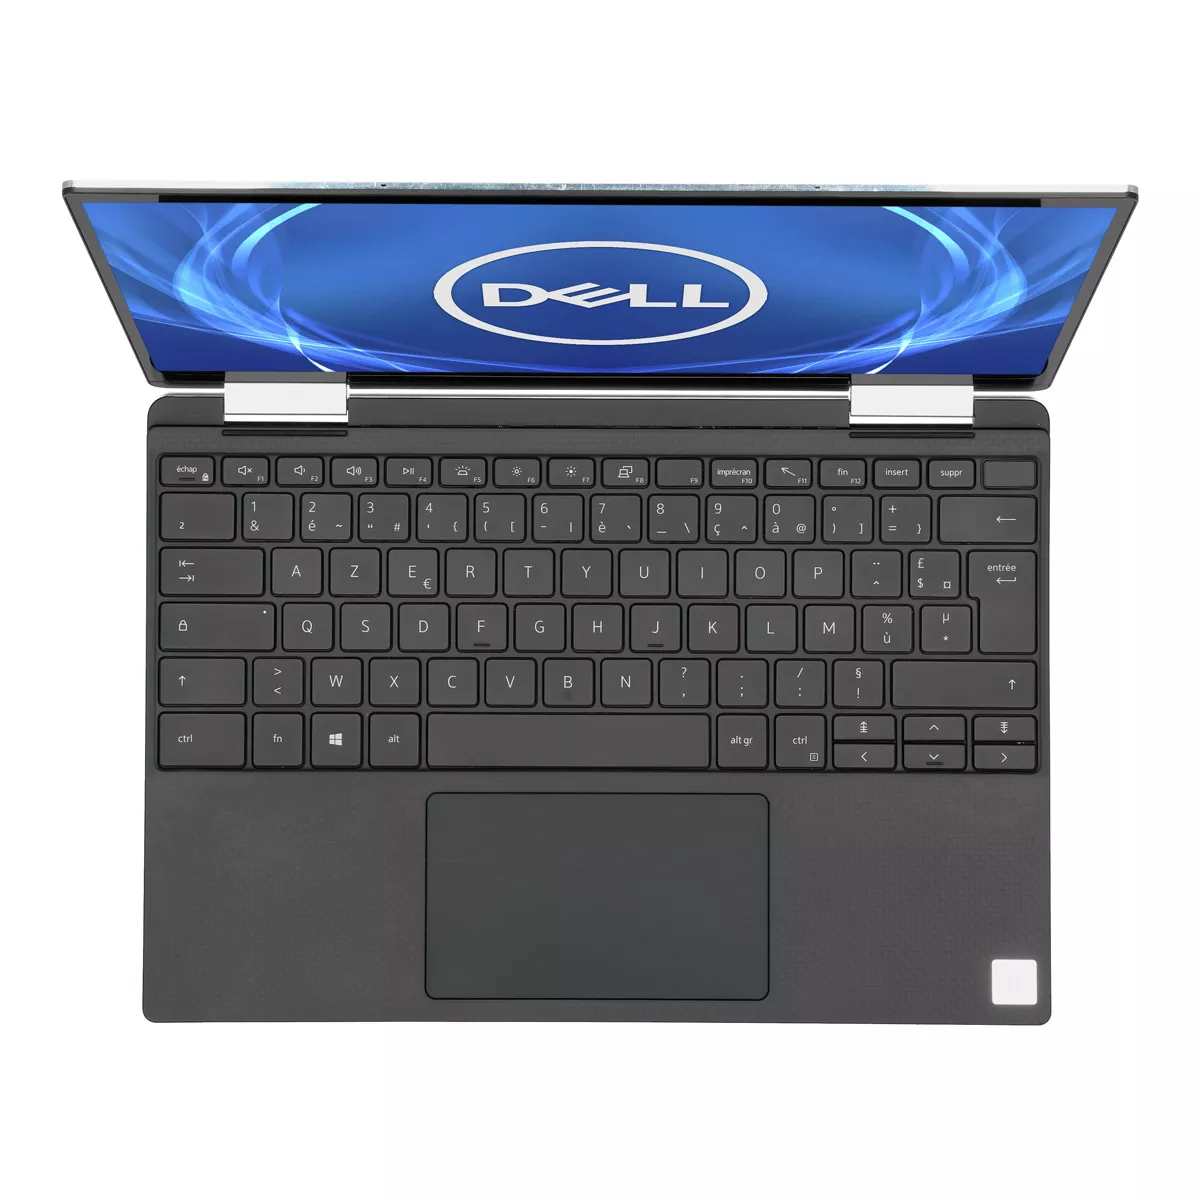 Dell XPS 13 - 7390 2-in1 Core i5 1035G1 240 GB M.2 nVME SSD Webcam A